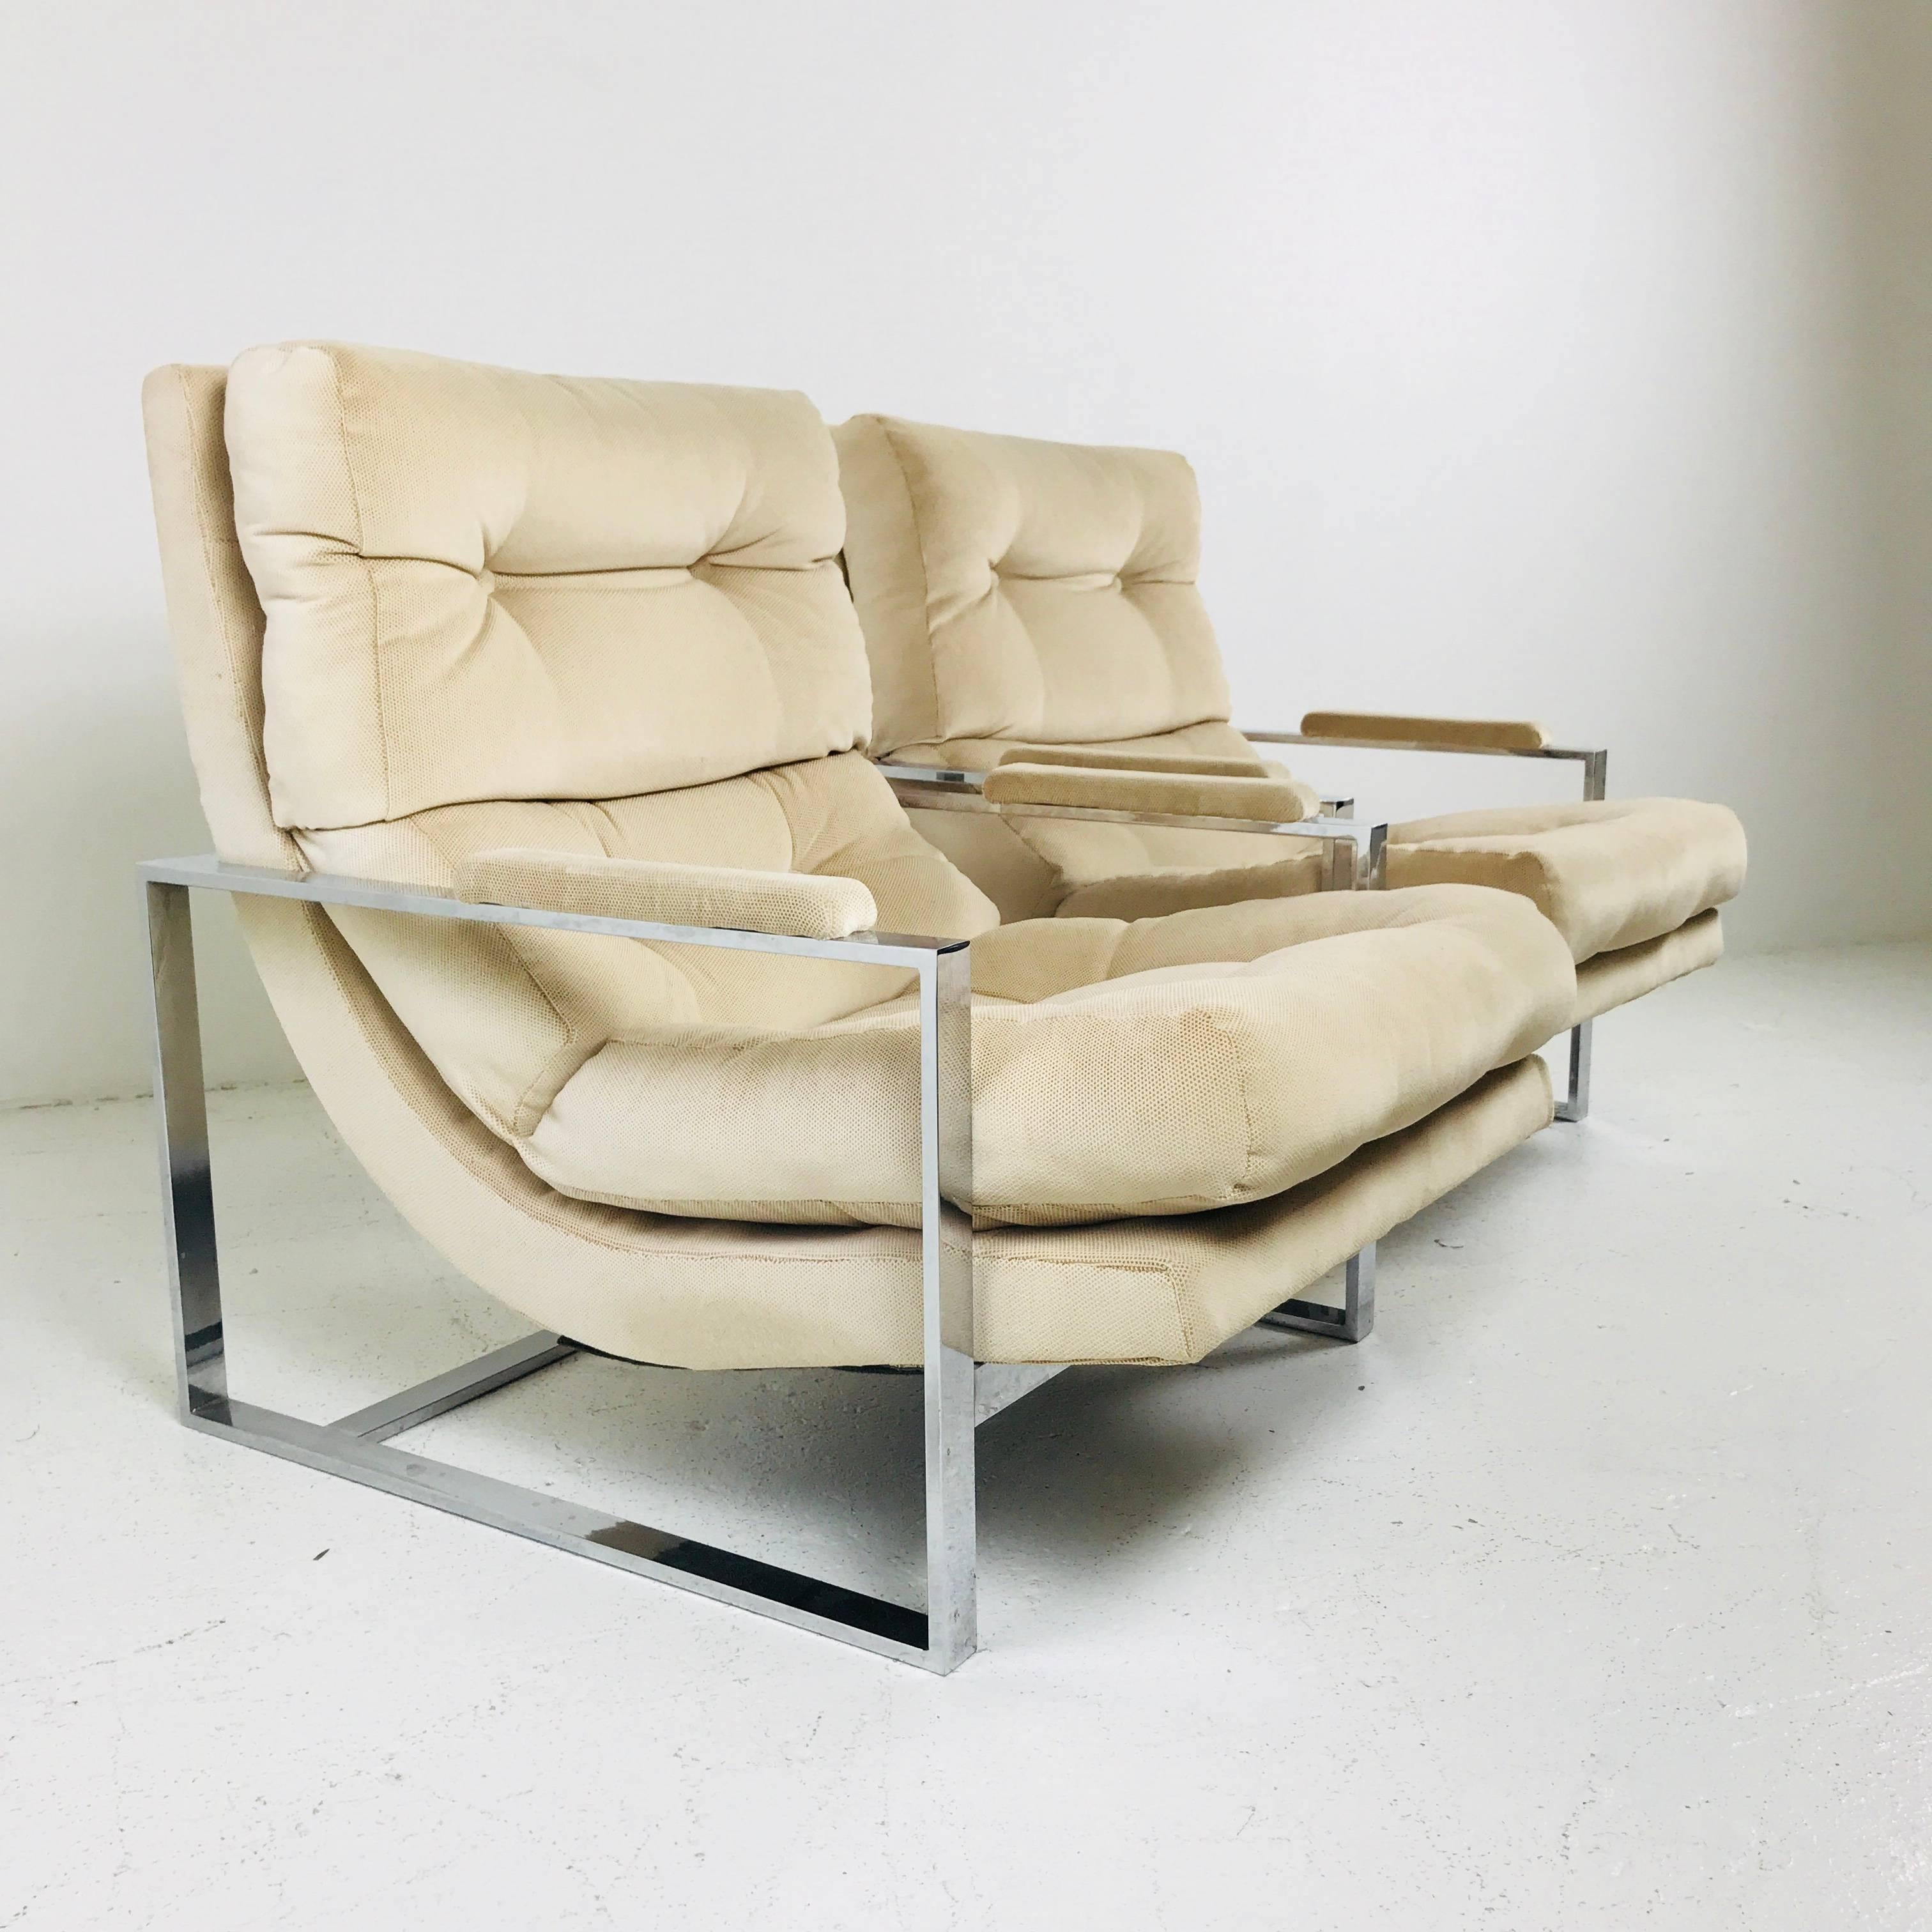 Mid-Century Modern Pair of Chrome Lounge Chairs in the Style of Milo Baughman